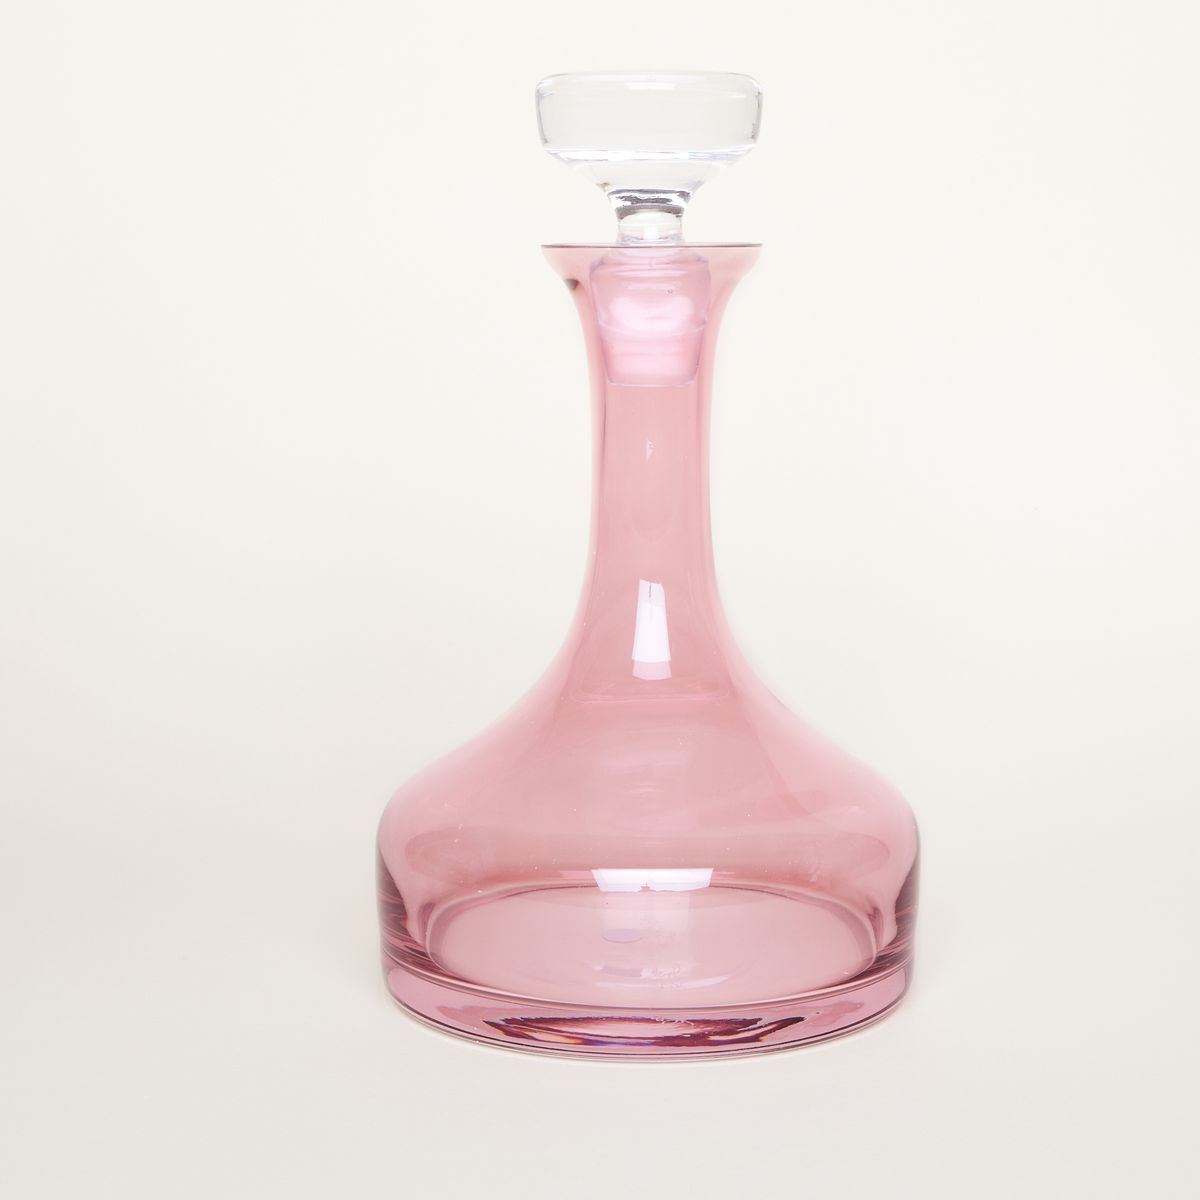 A clear glass topper on a pink decanter with a long neck and rounded base.